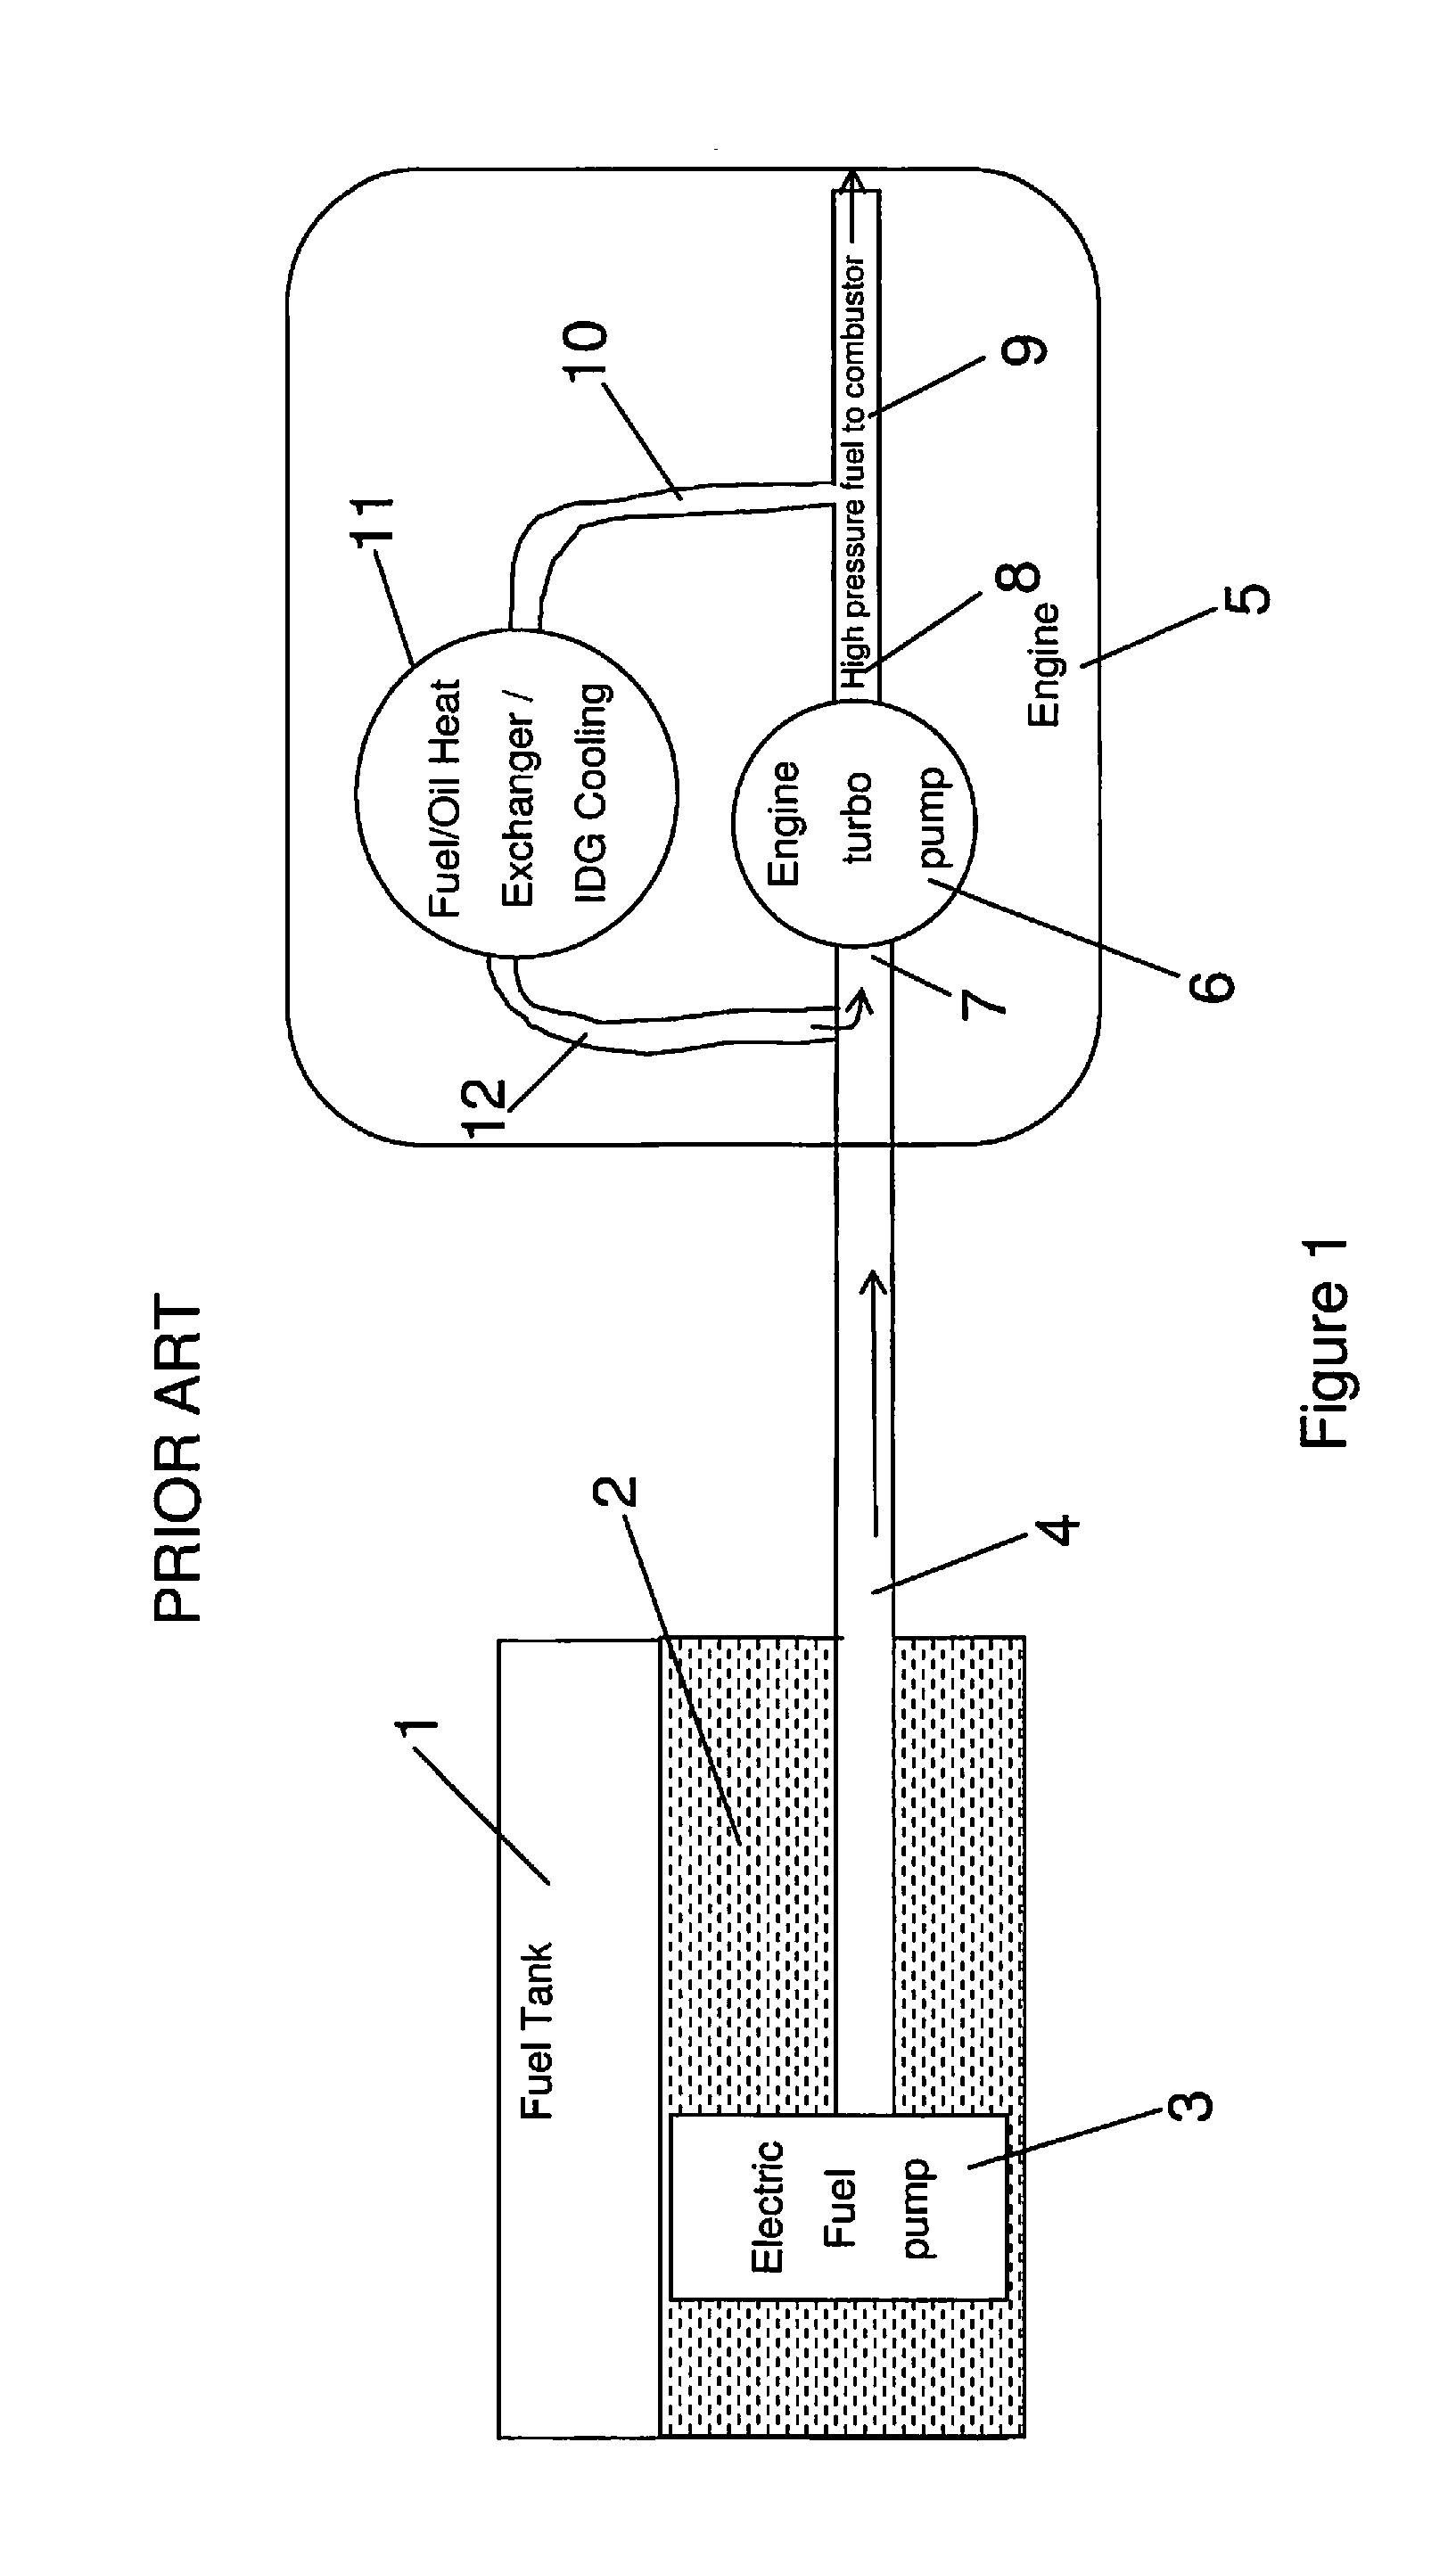 Aircraft fuel system with fuel return from engine